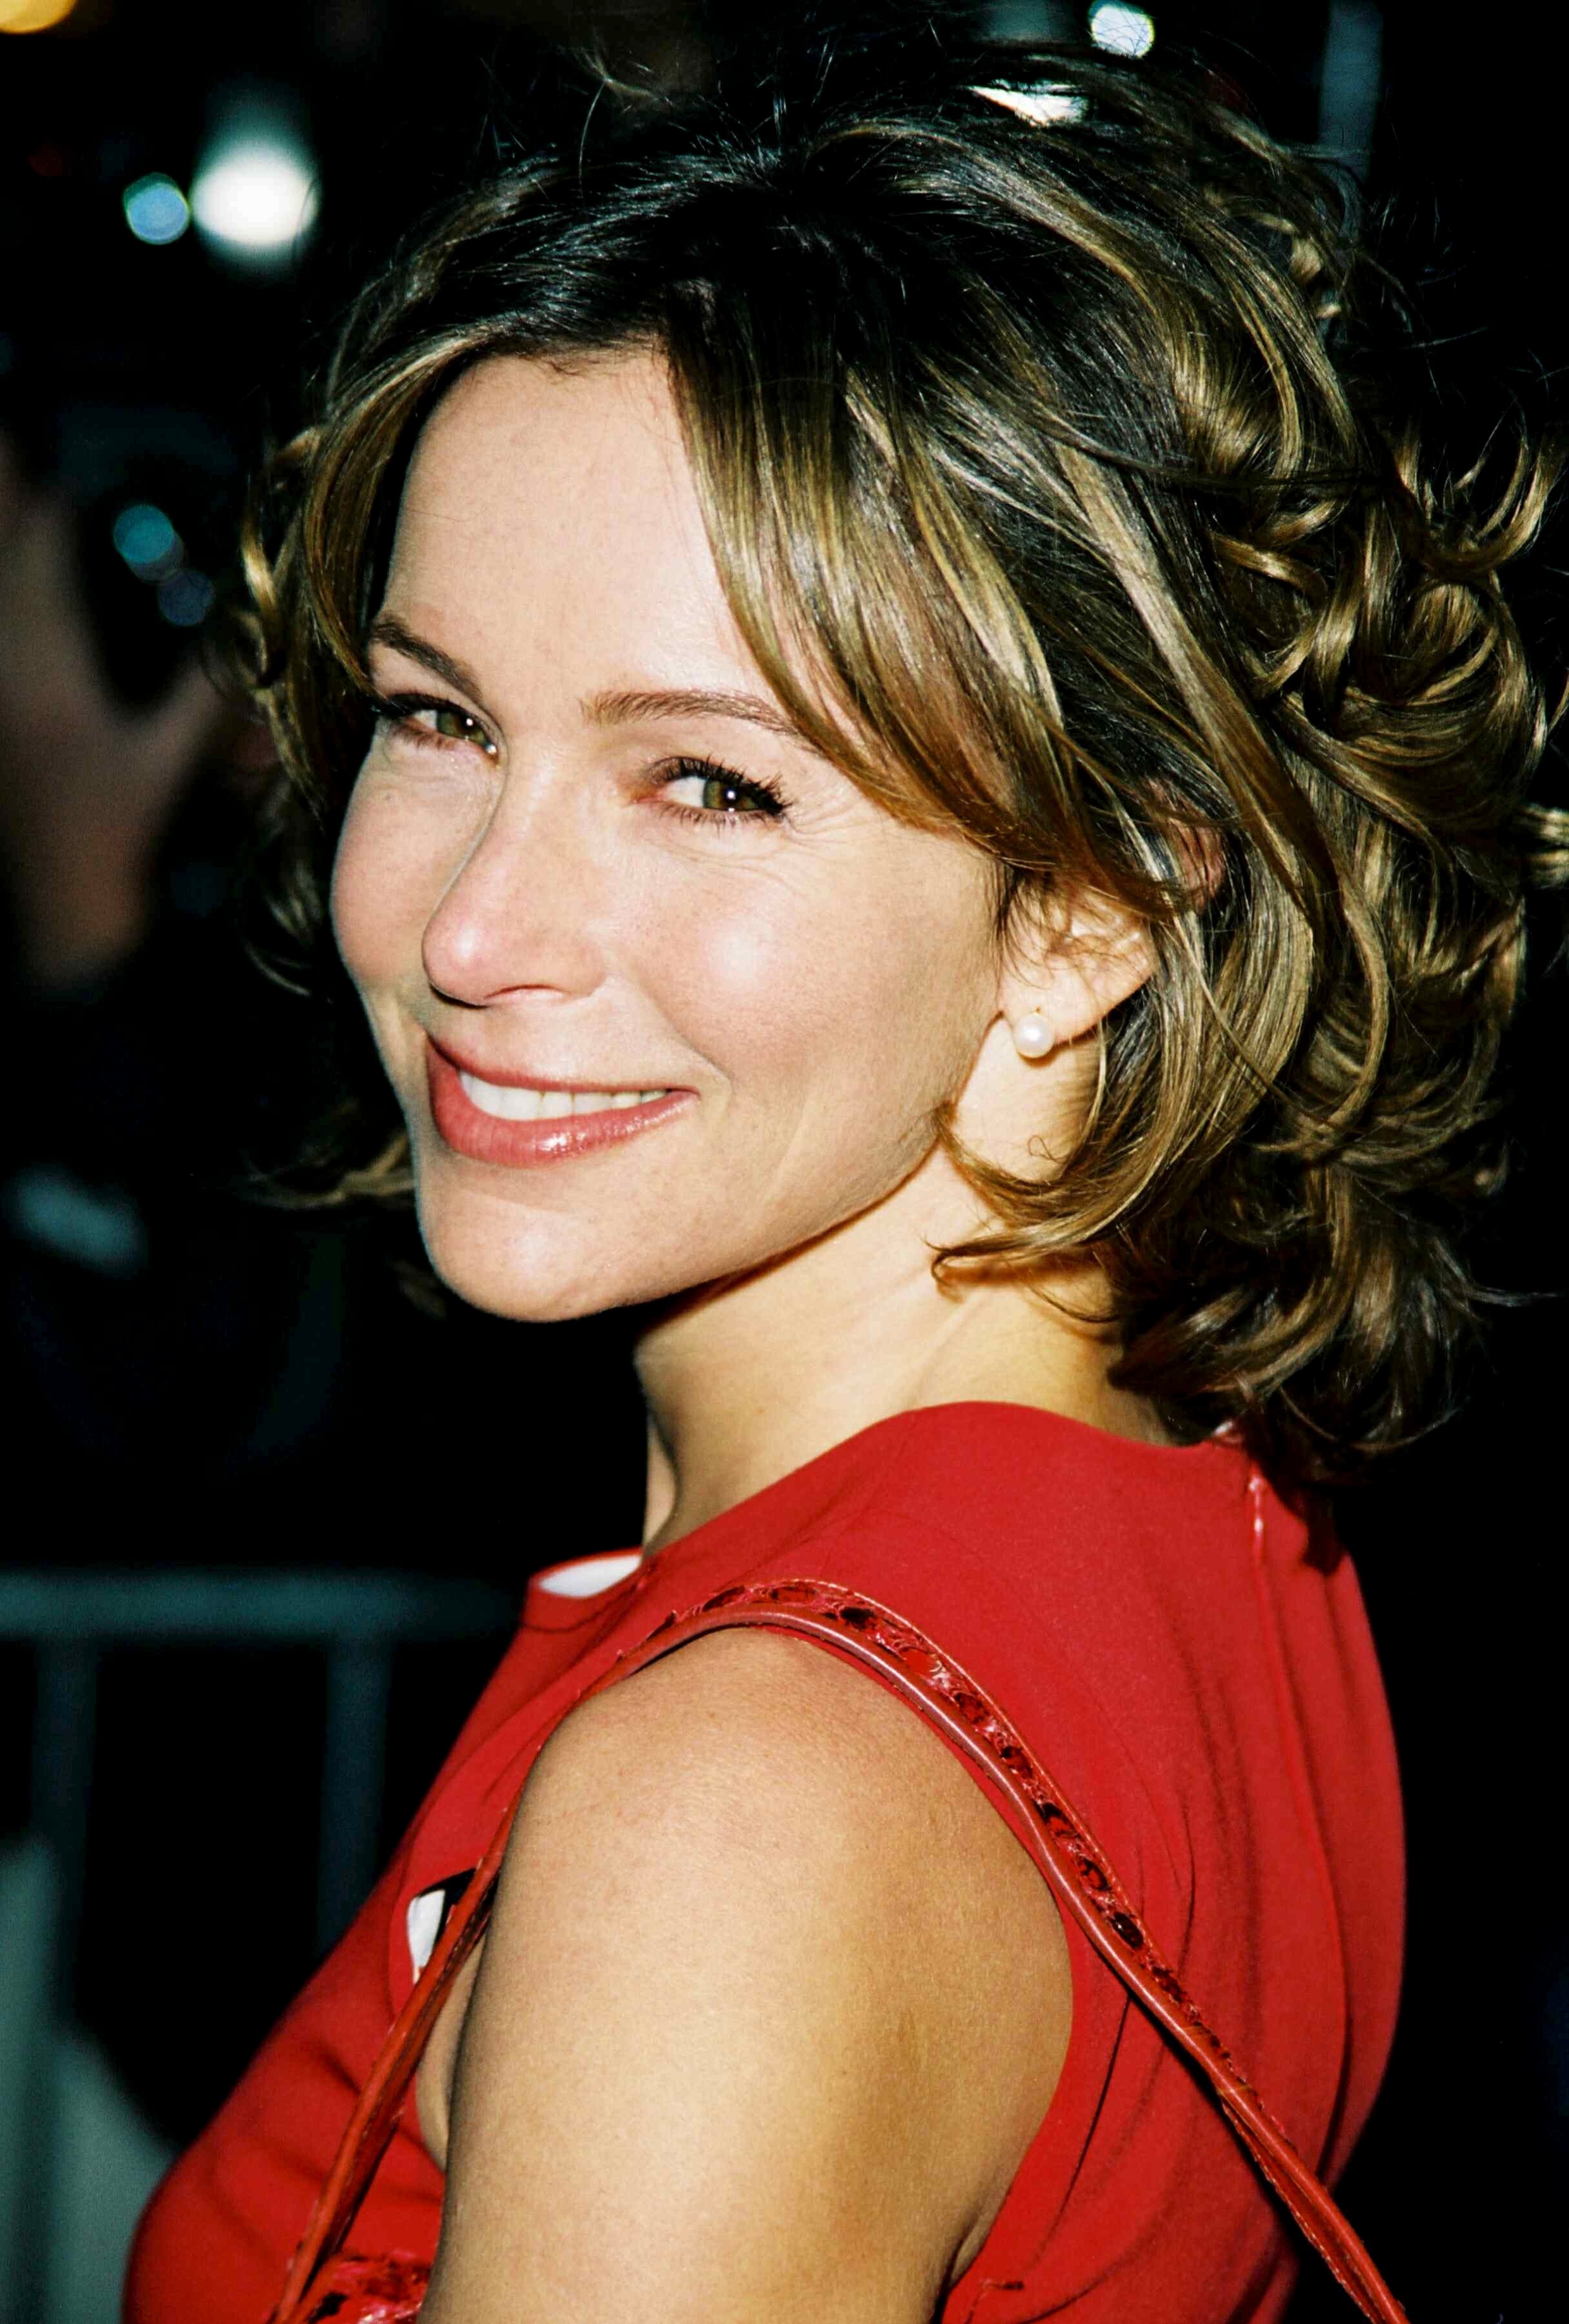 <p><span>Jennifer Grey's career hit the skids after she changed up her nose in the early '90s -- and became completely unrecognizable. "I went into the operating room a celebrity and came out anonymous," the actress (pictured in 2000) told The Mirror in 2012. "It was the nose job from hell. I'll always be this once-famous actress nobody recognizes because of a nose job."</span></p>